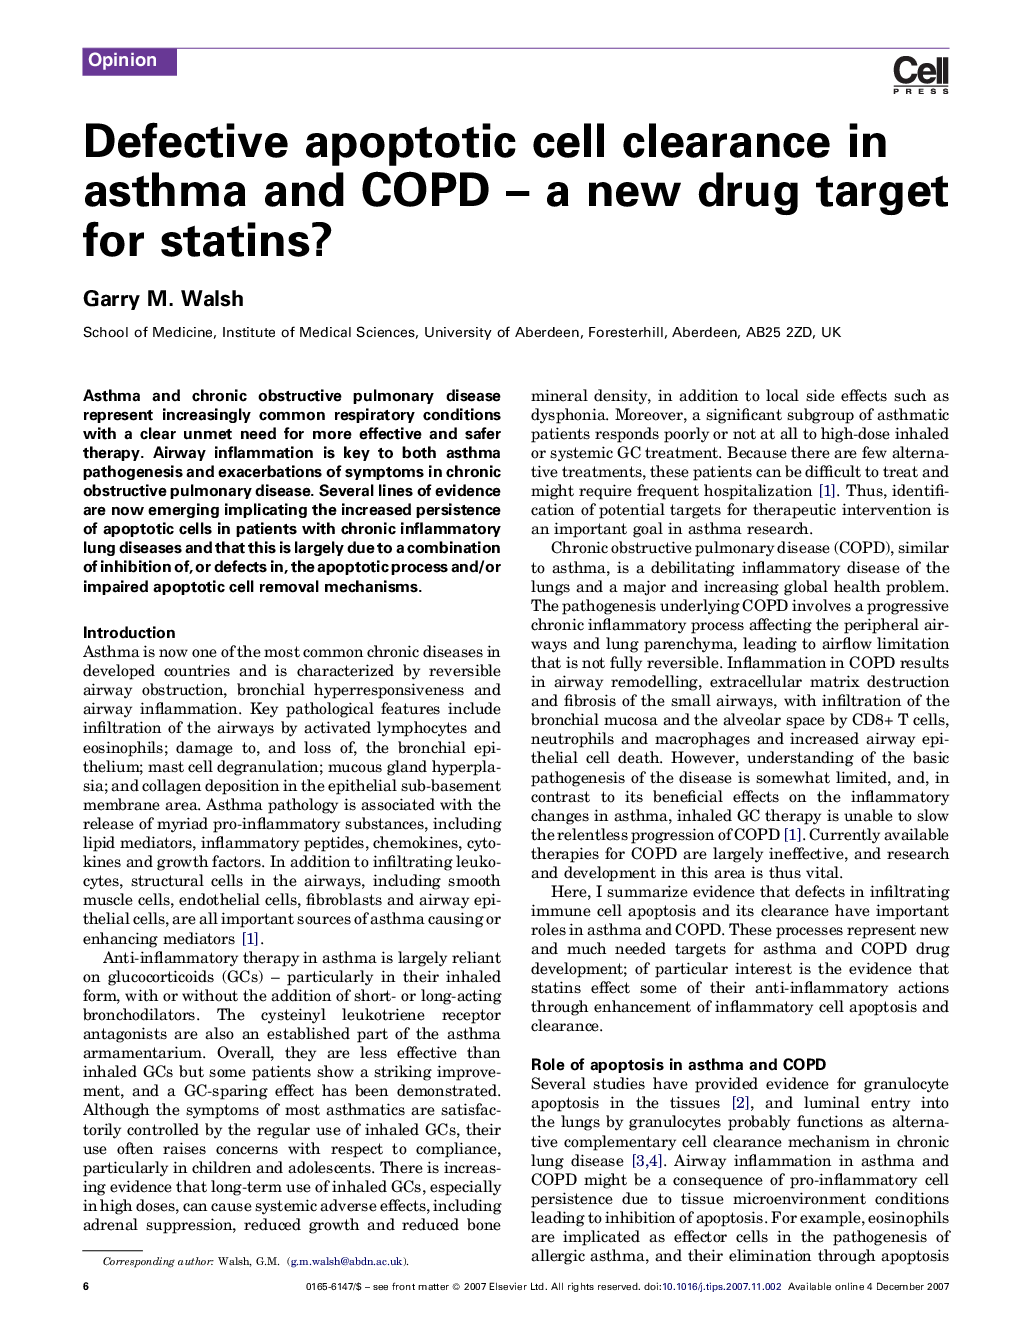 Defective apoptotic cell clearance in asthma and COPD – a new drug target for statins?